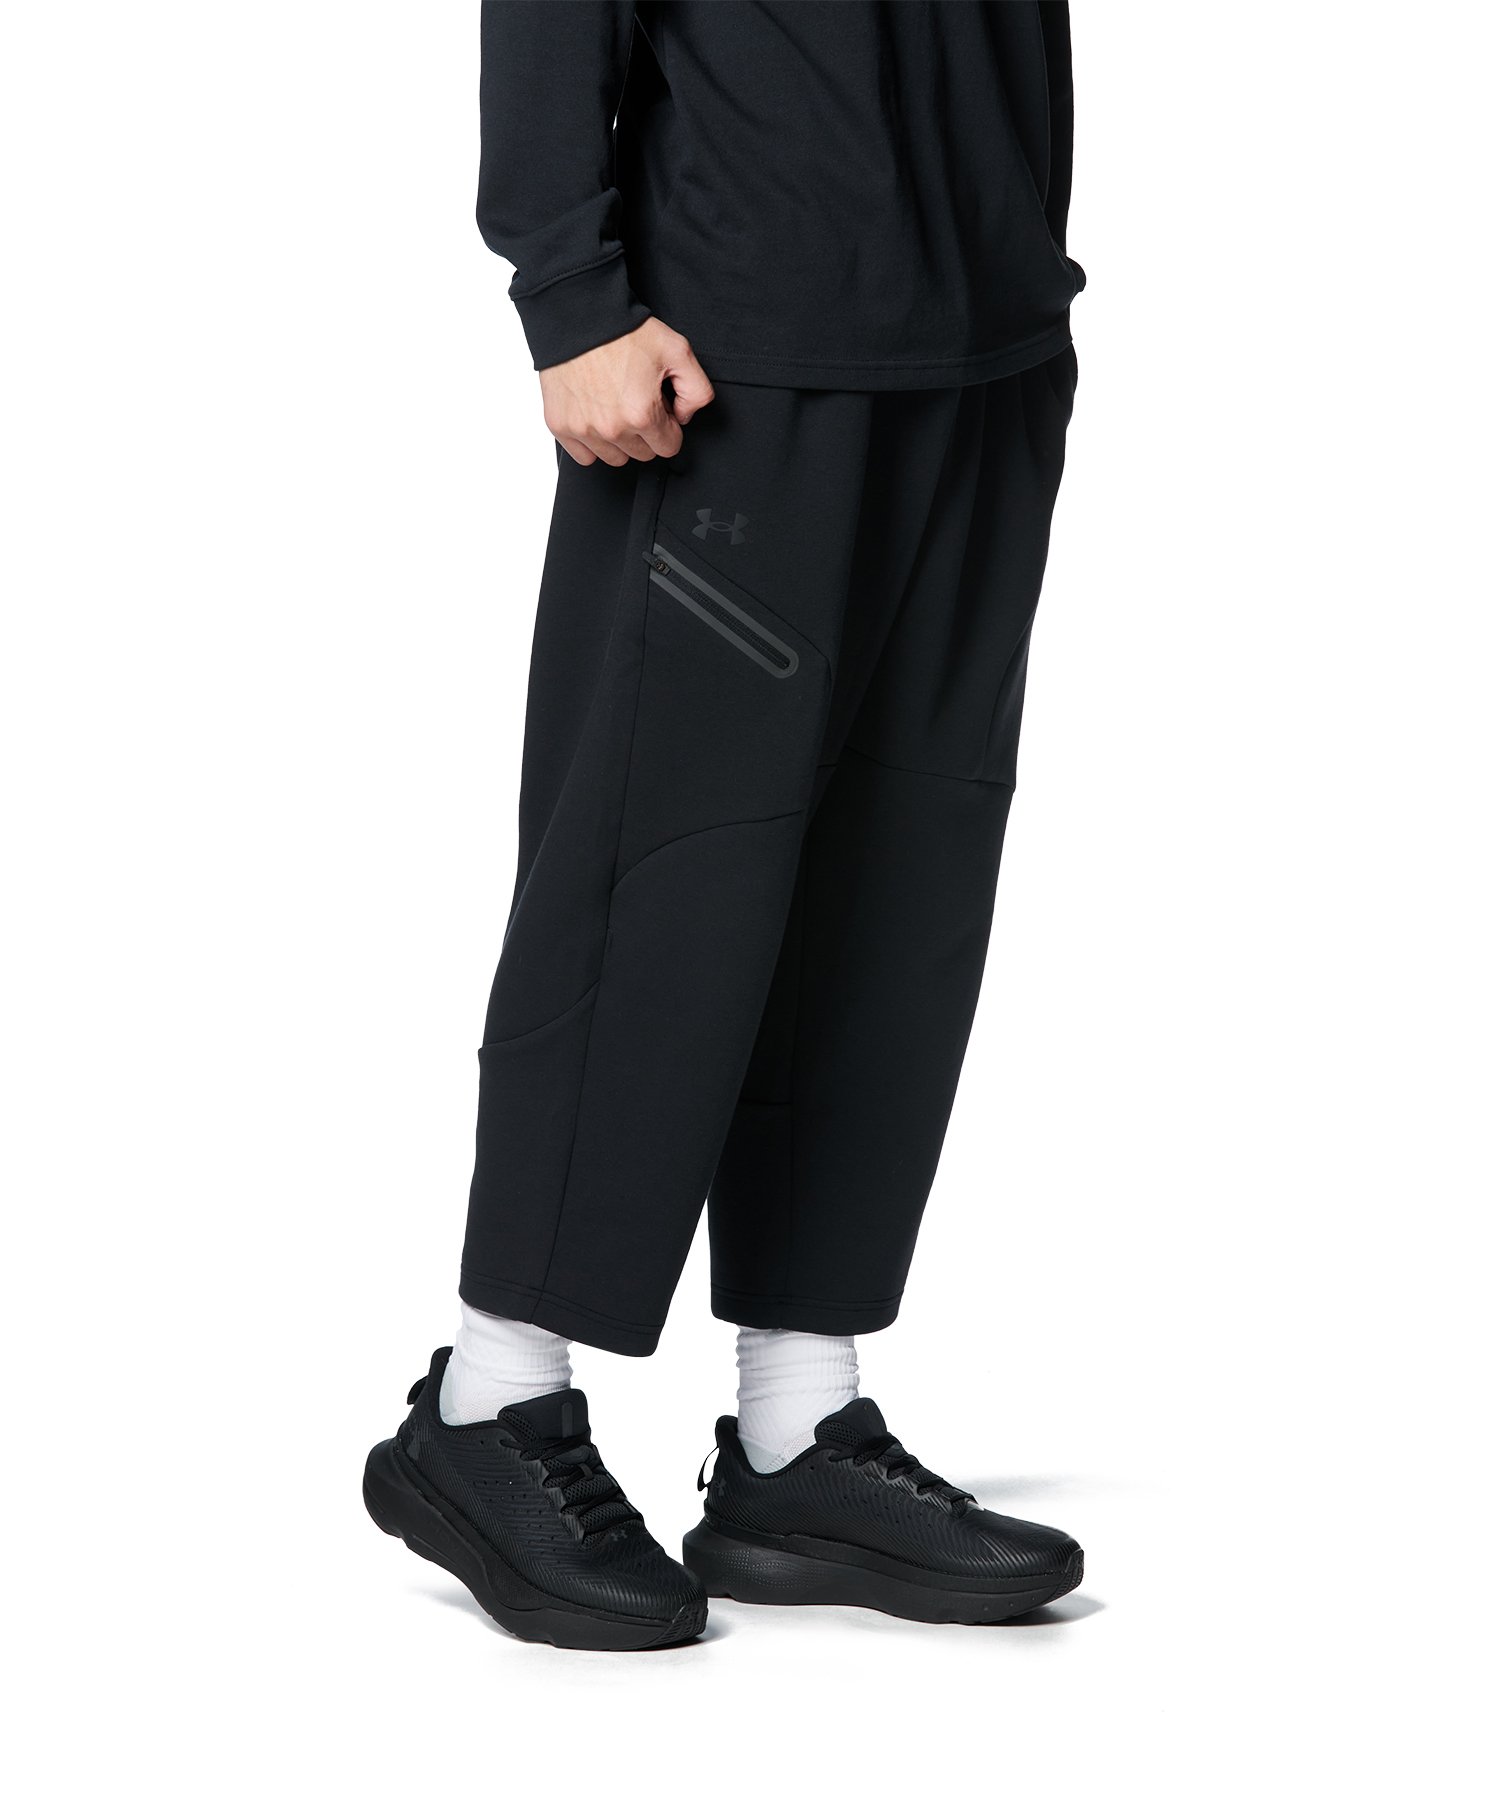 UNDER ARMOUR Unstoppable Fleece BAGGY Crop ズボン 黒 XL 男